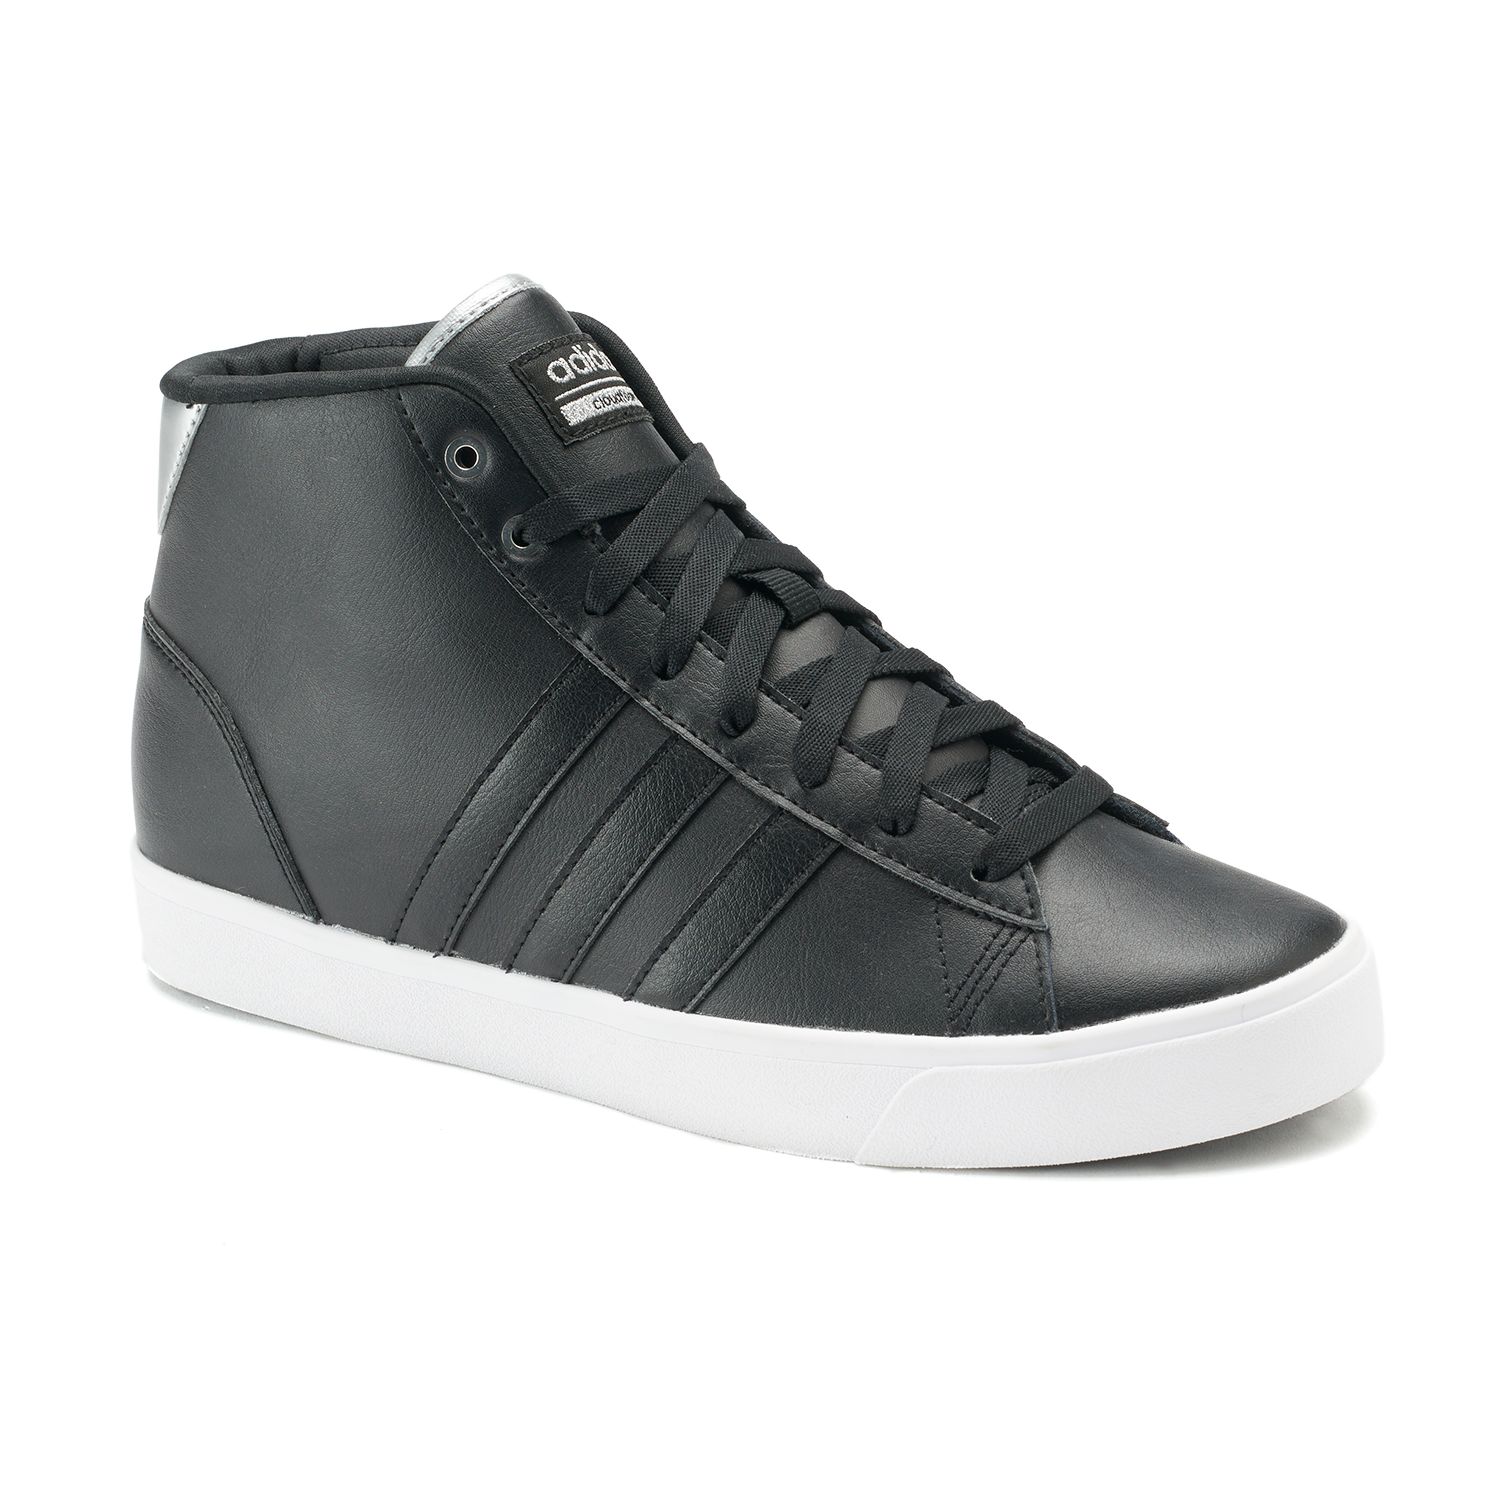 adidas neo womens shoes